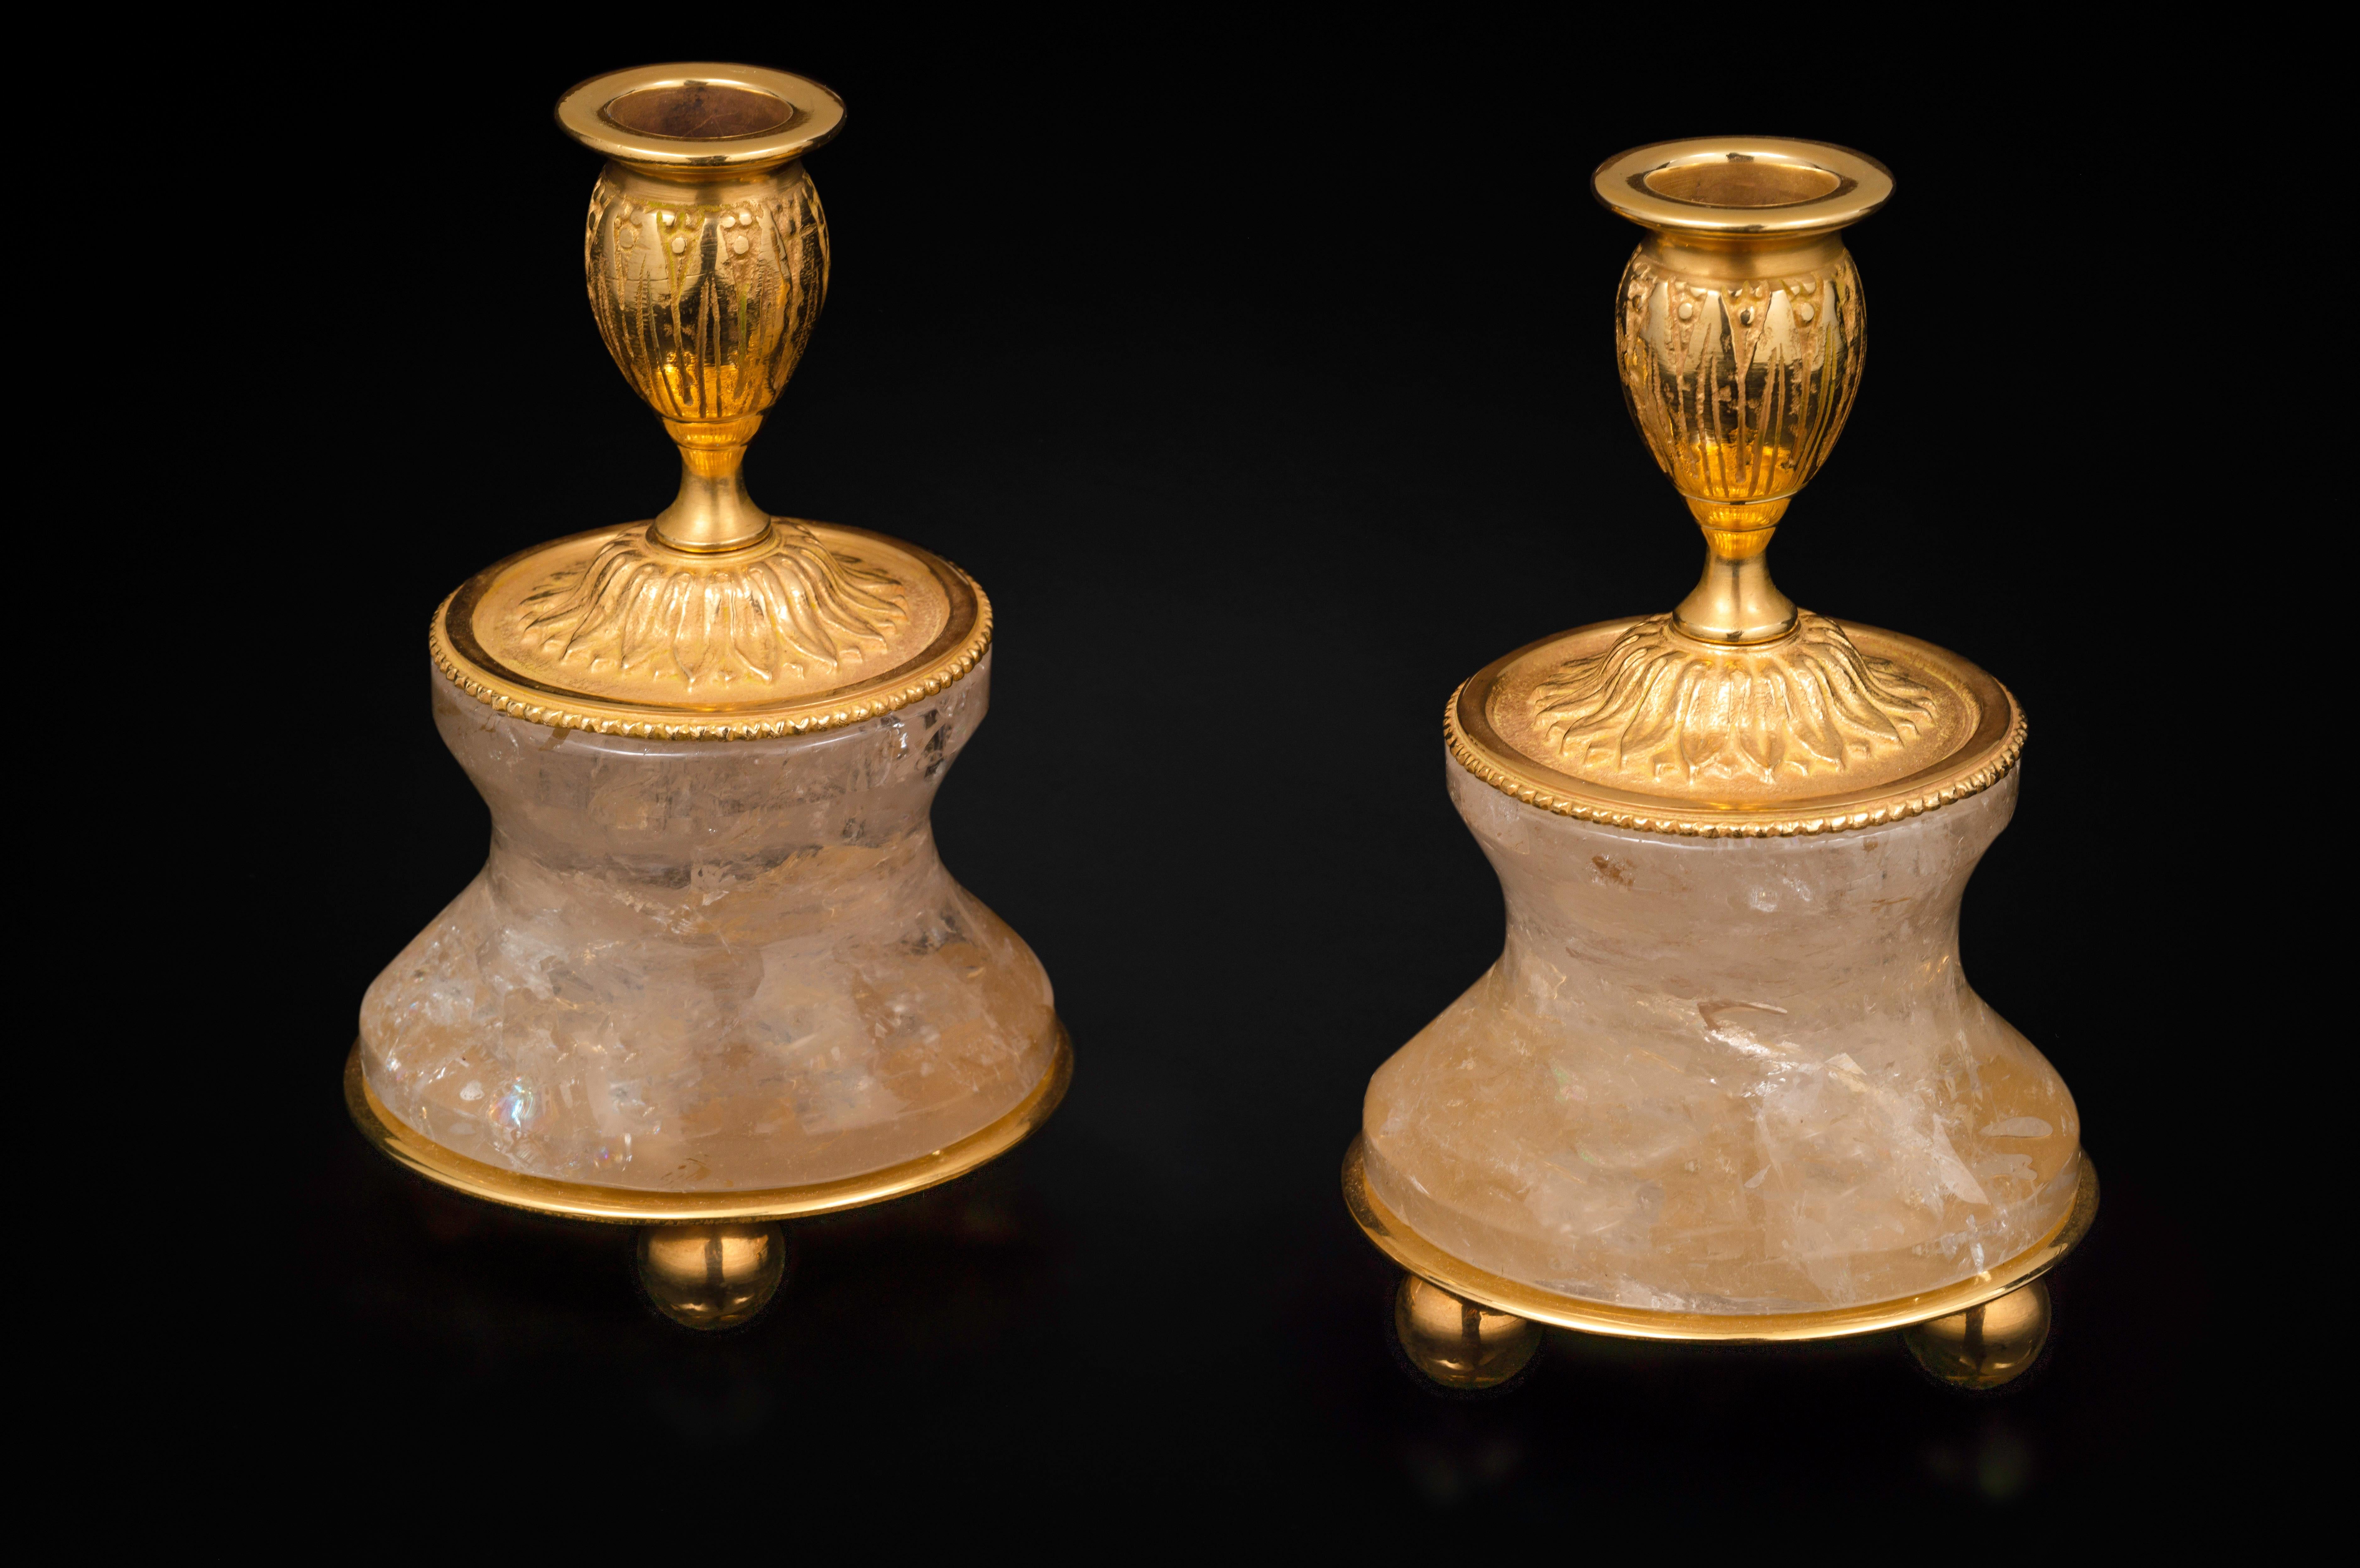 Very chic pair of rock crystal pair of lamps or candlesticks in the typic style of Louis XVI.
So you can used as you want, depend of your interiors and mood.
The base is carved in a single piece of rock crystal stone.
The top is made in France in